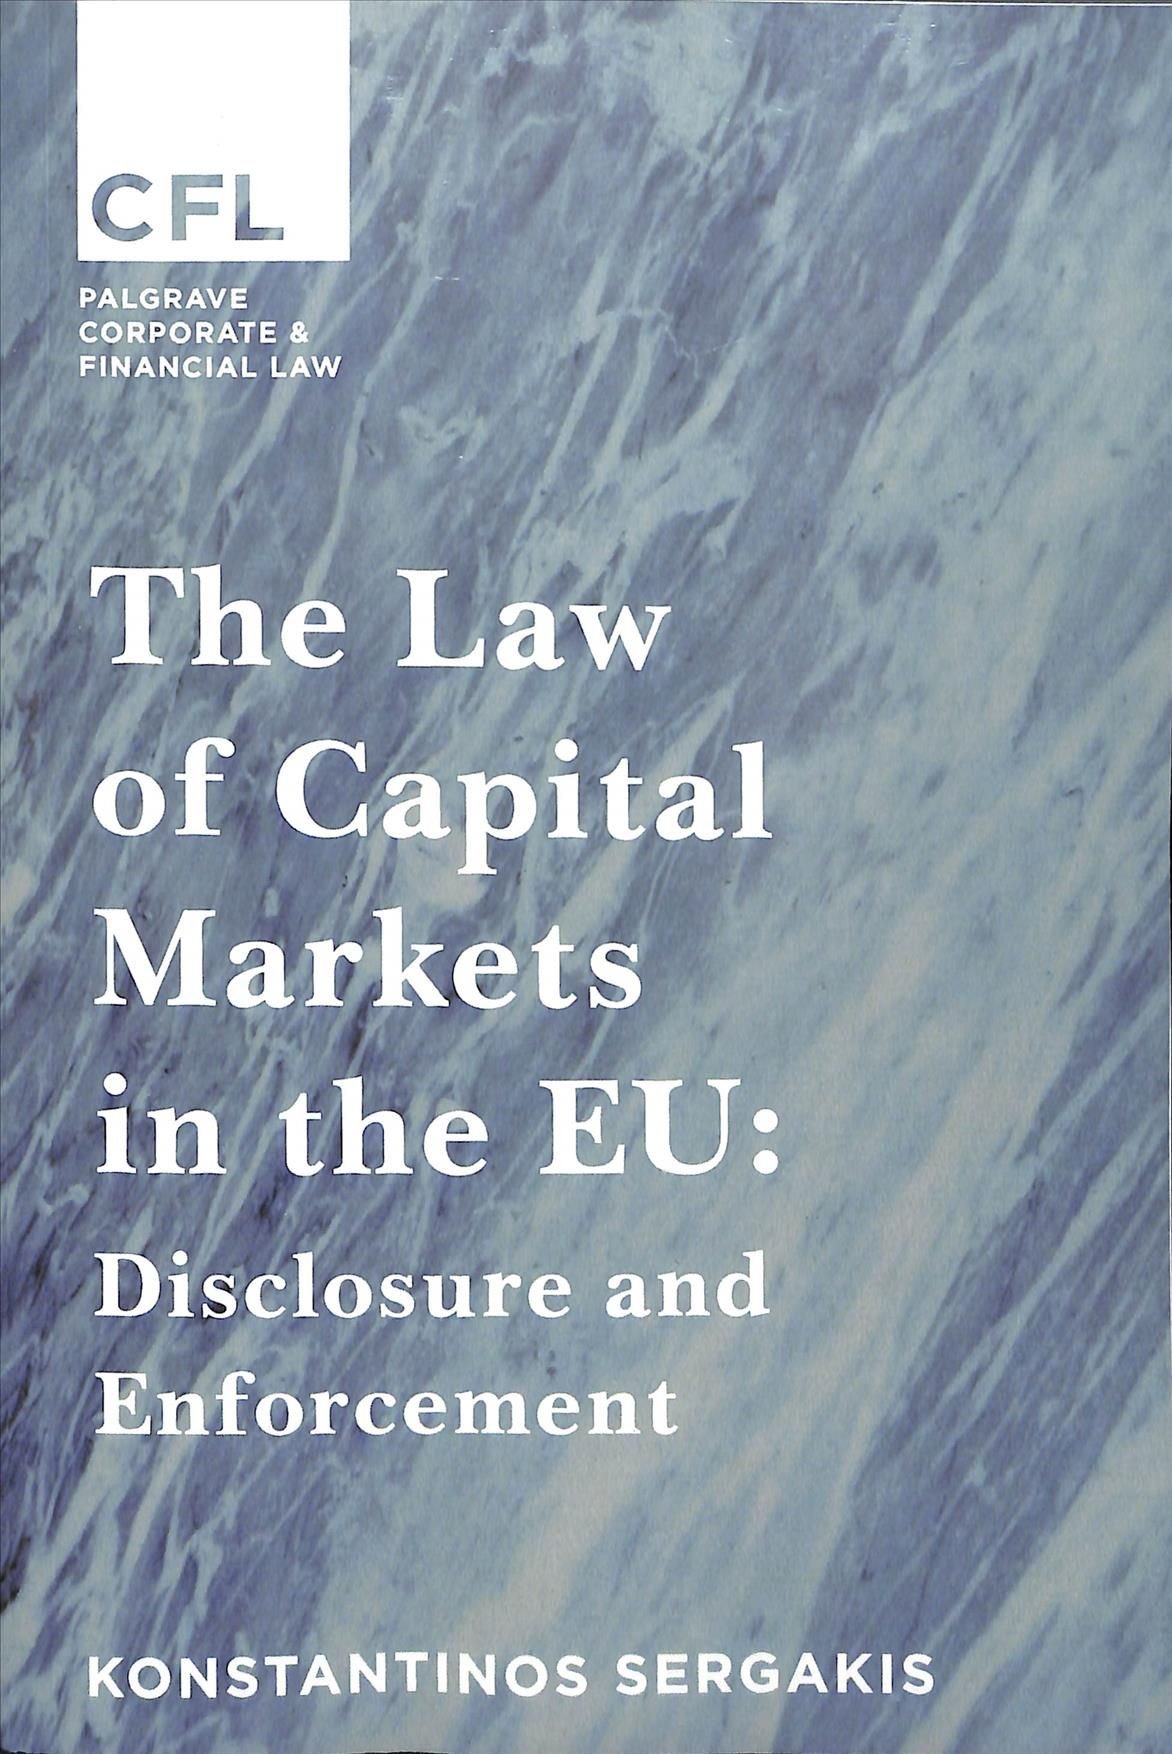 The Law of Capital Markets in the EU